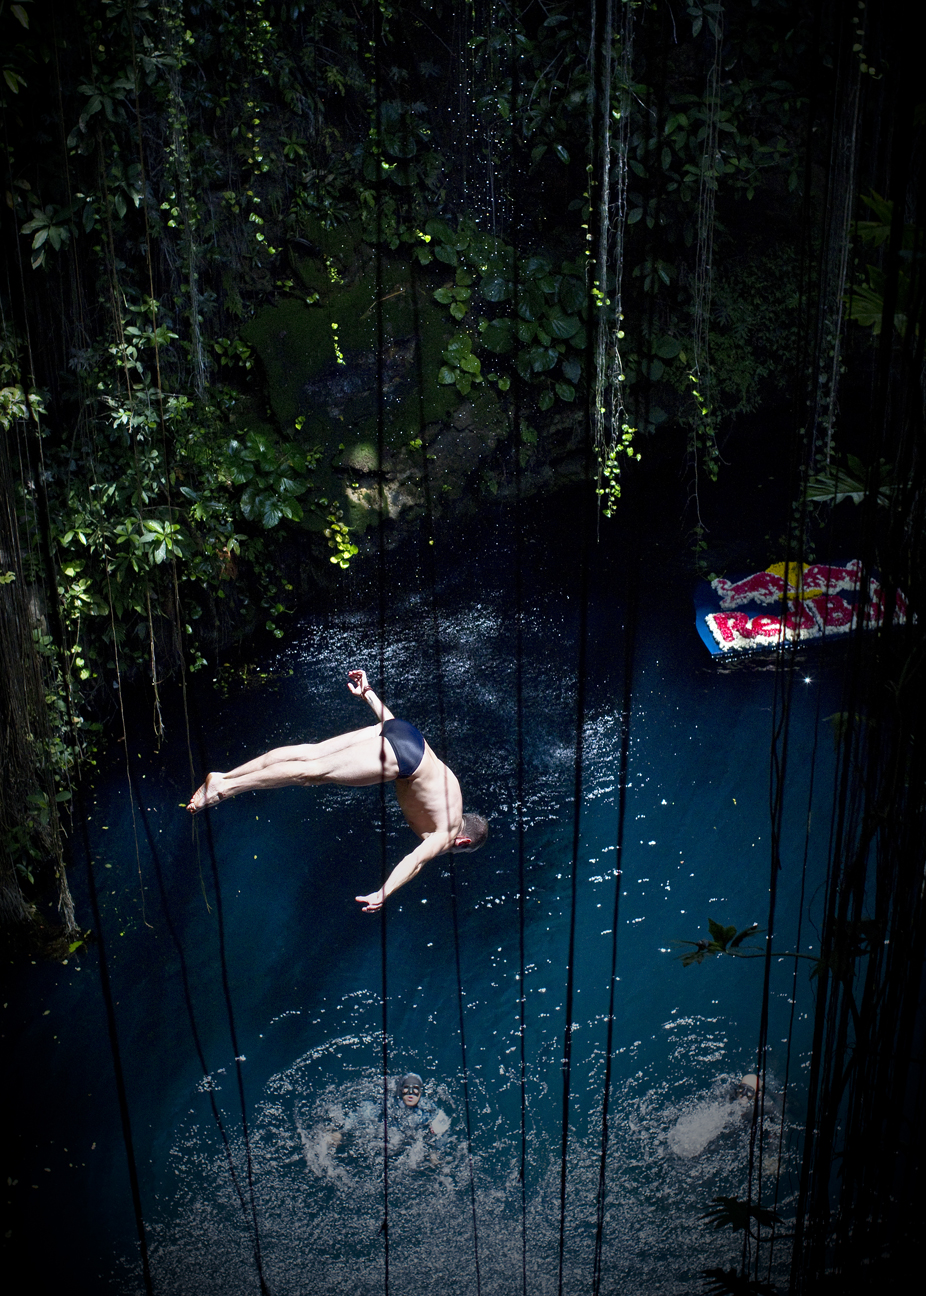 Slava Polyeshchuk of the Ukraine dives from the 27.25 metre platform during the second stop of the Red Bull Cliff Diving World Series at Ik Kil cenote in Chichen Itza, Yucatan, Mexico on April 10th 2011.